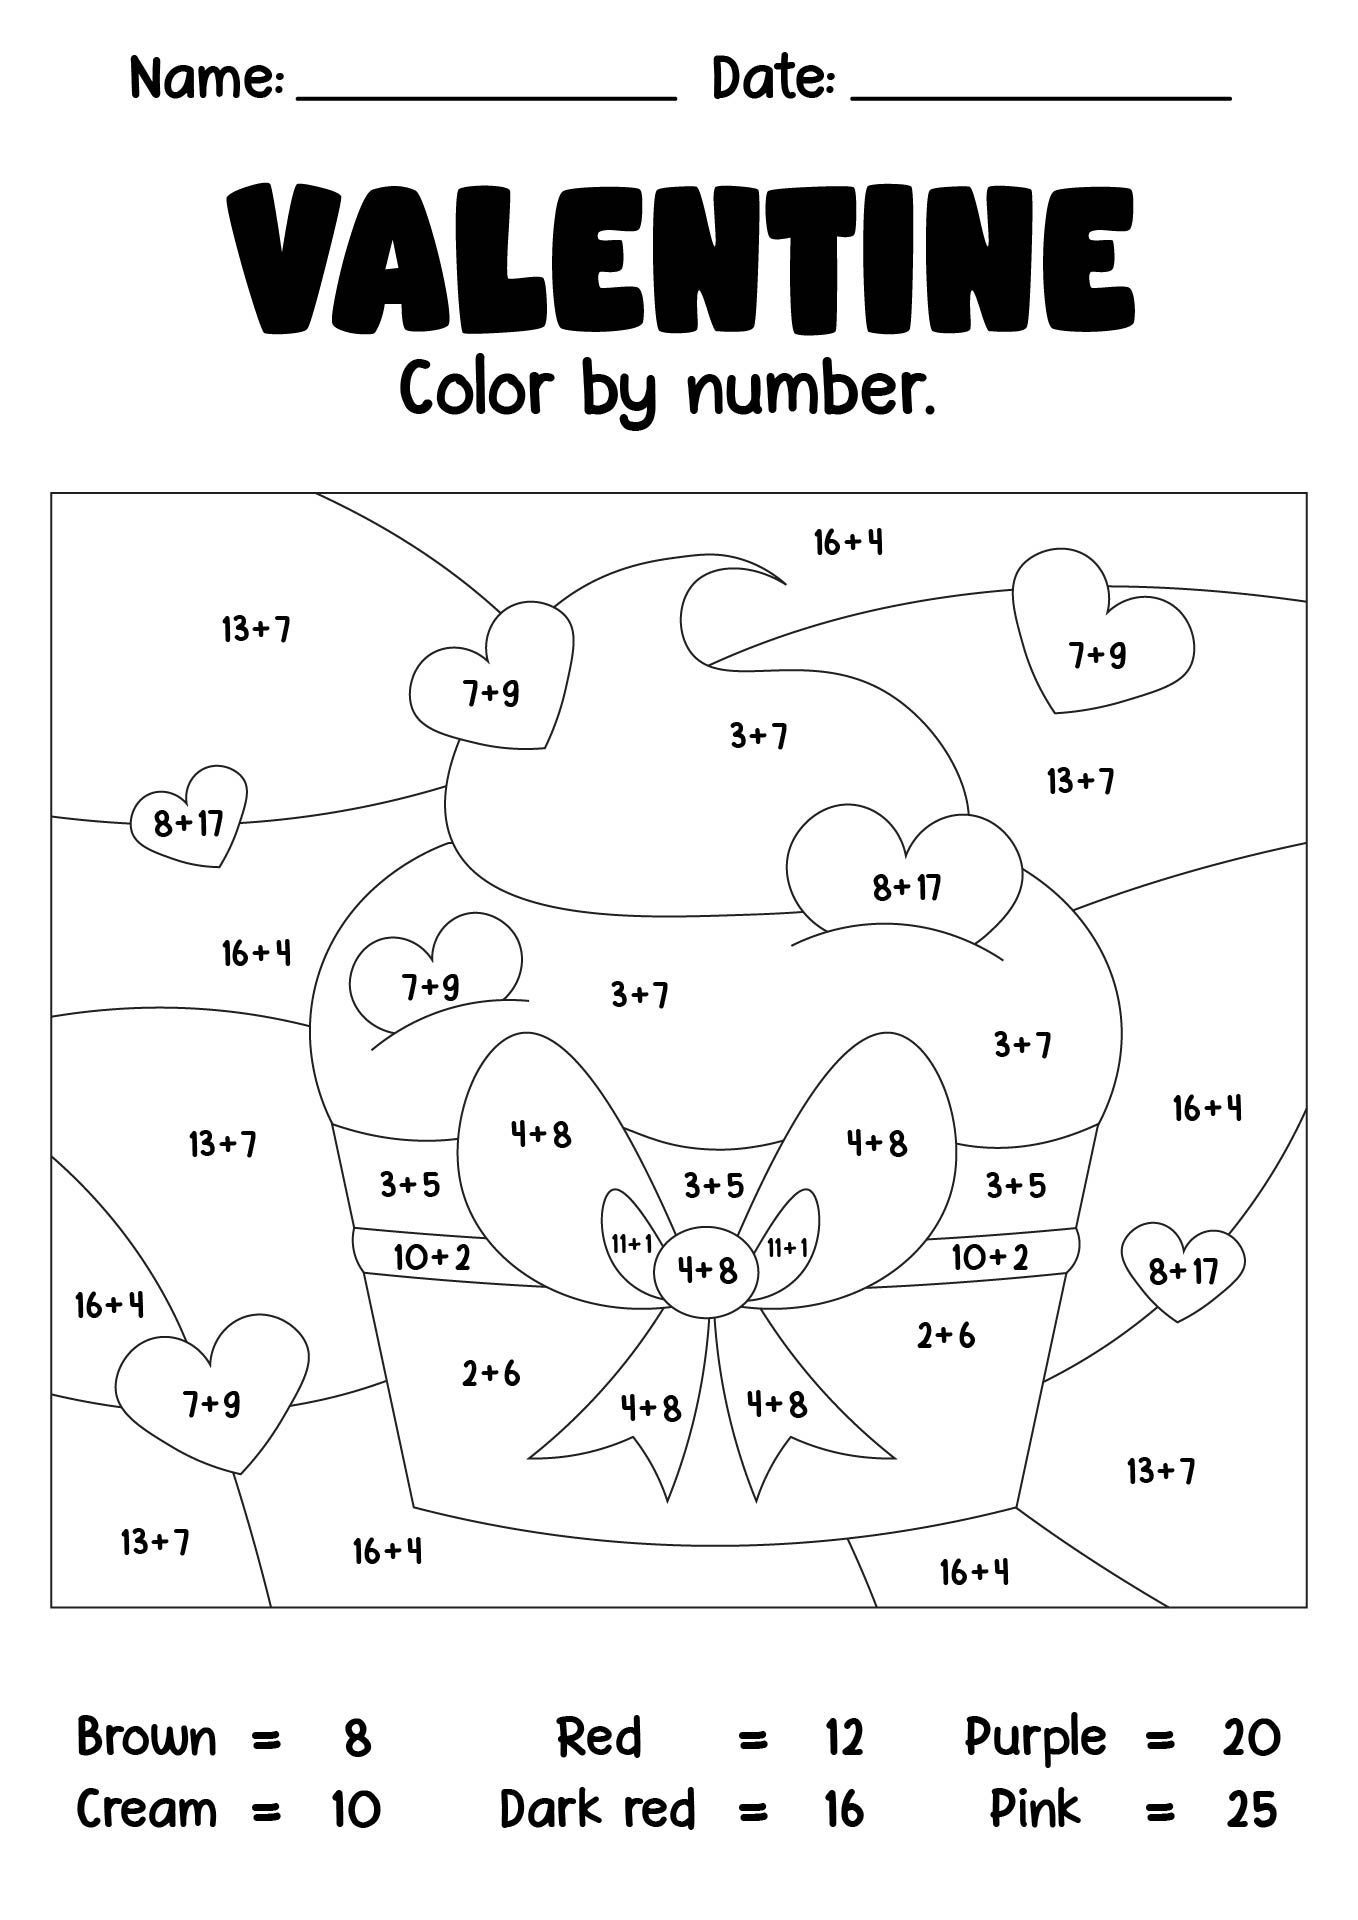 Valentines Day Color by Number Worksheets